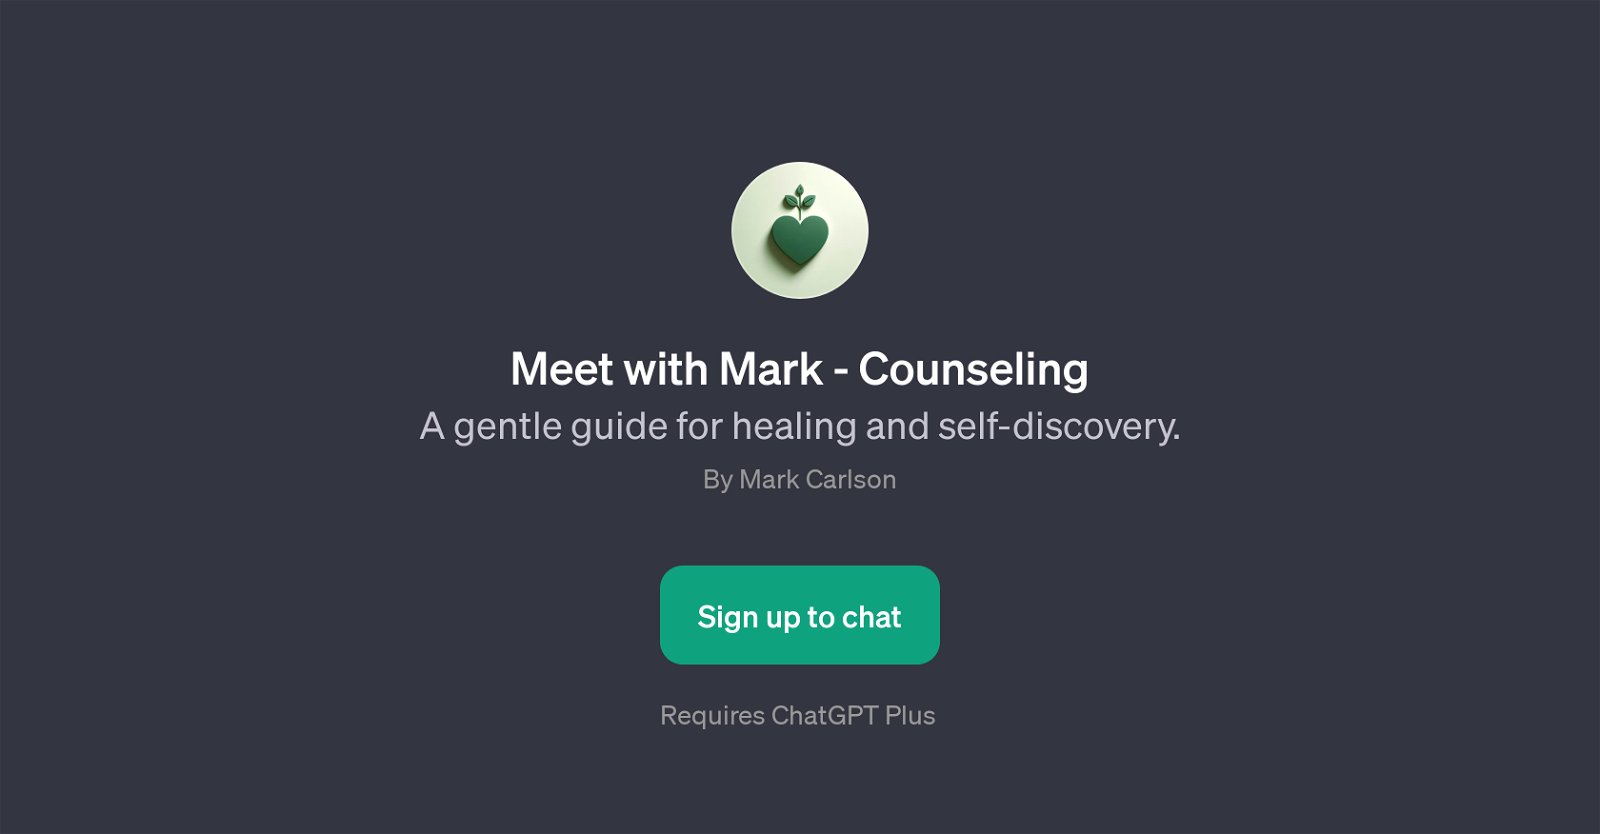 Meet with Mark - Counseling website